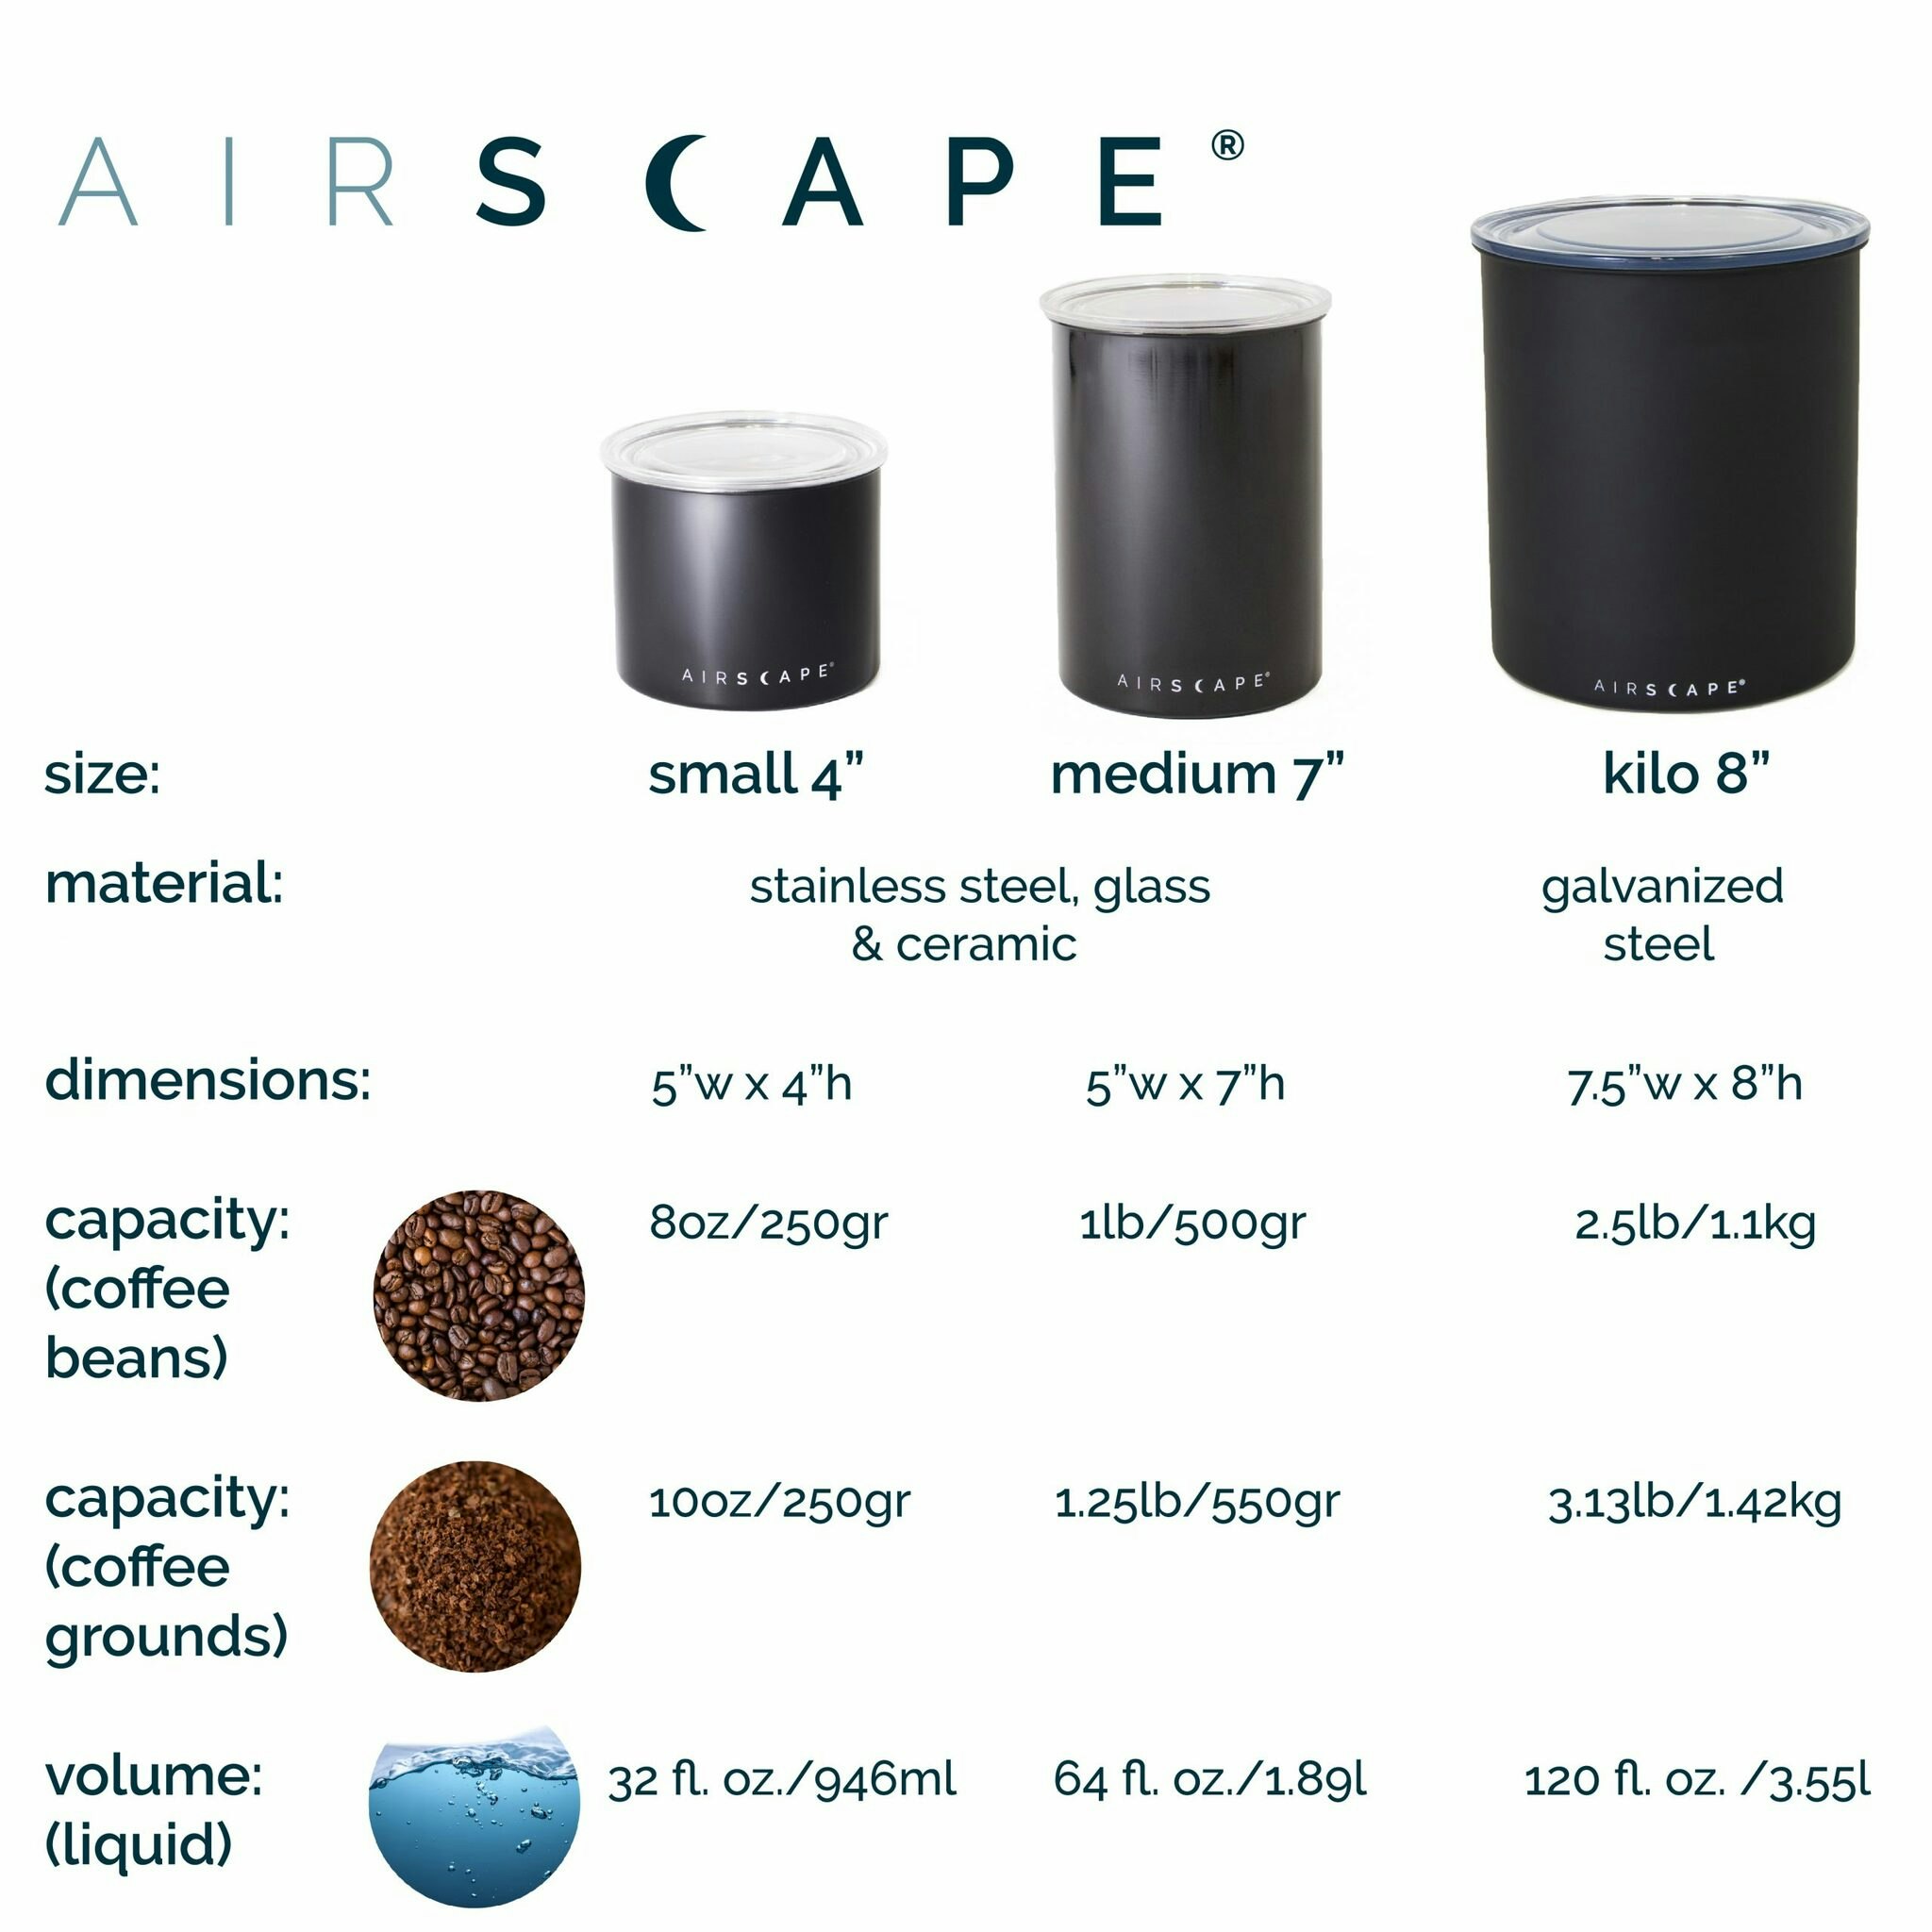 Airscape® storage can